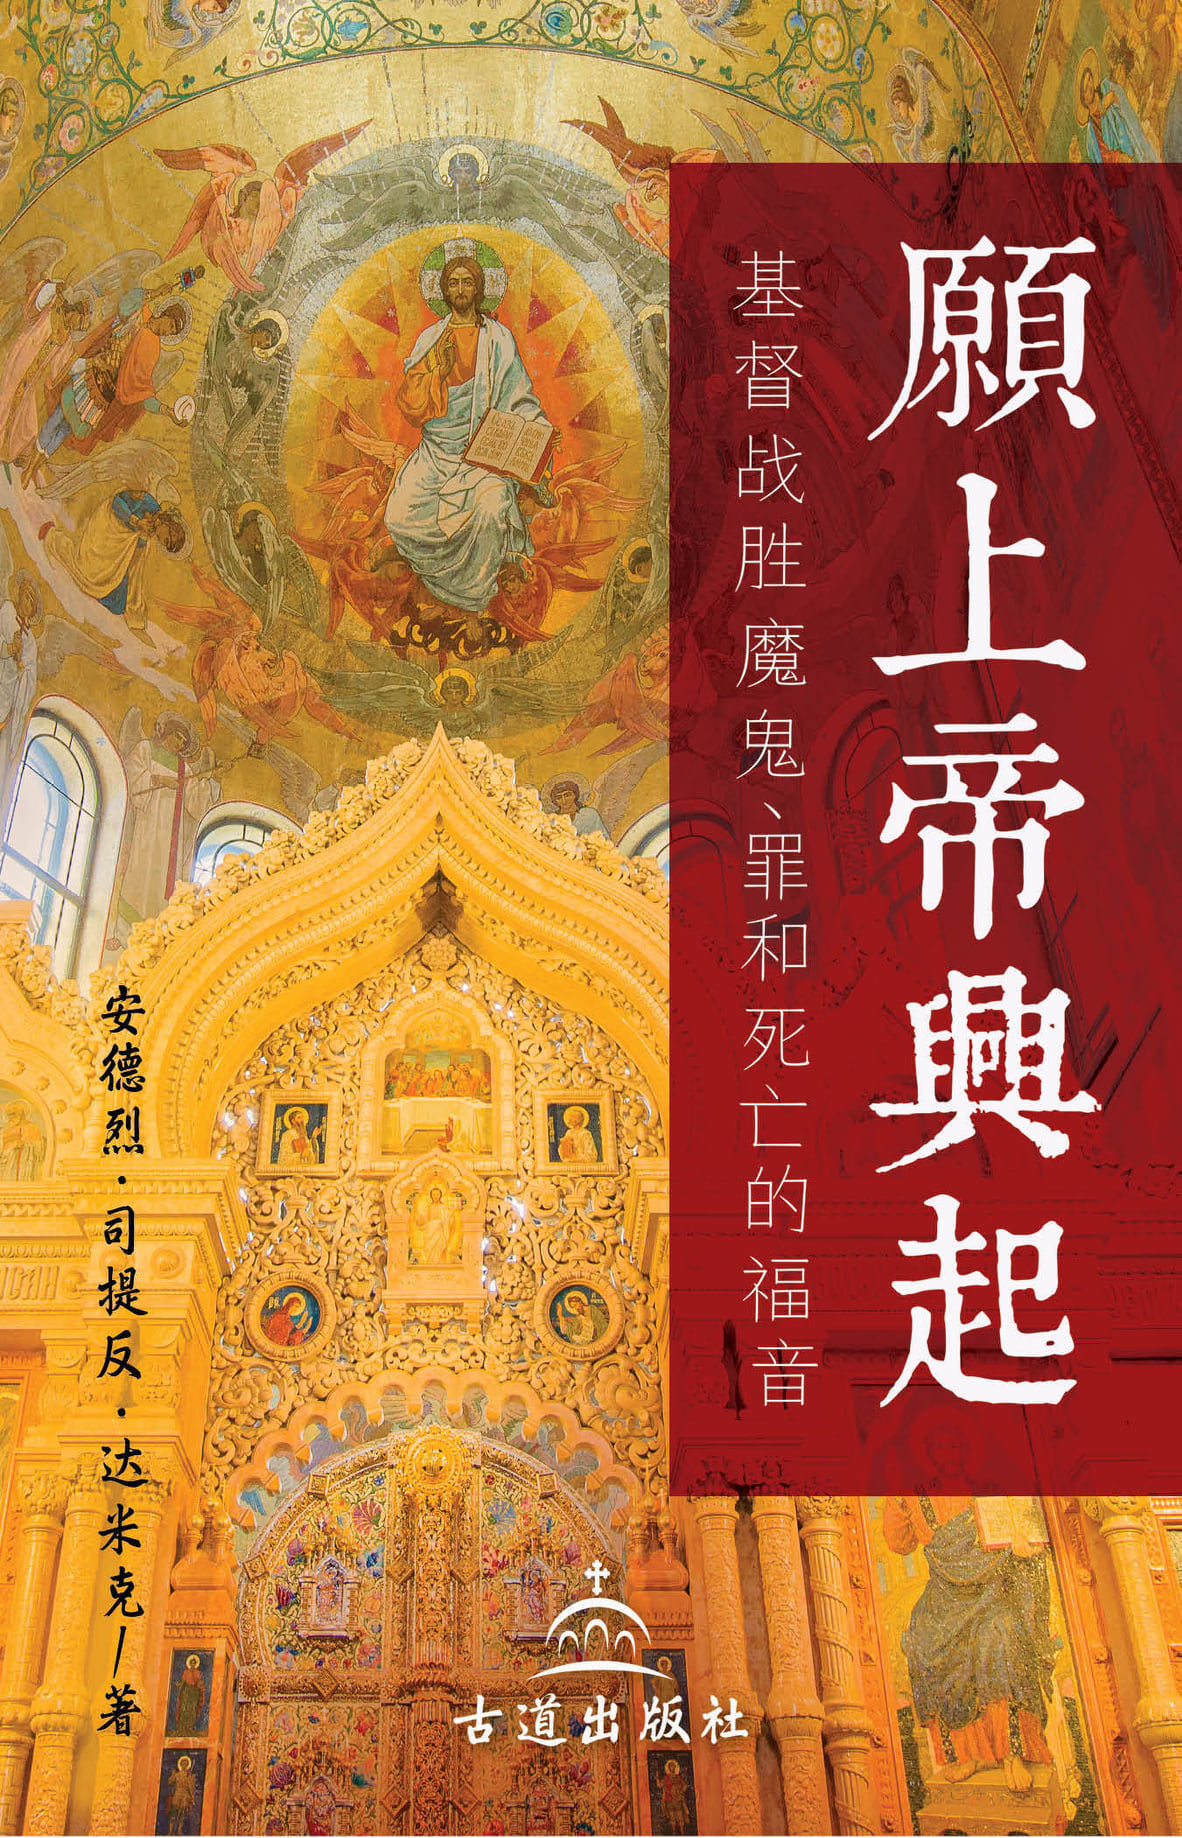 FREE DOWNLOAD: Arise, O God: The Gospel of Christ's Defeat of Demons, Sin, and Death in Mandarin Chinese